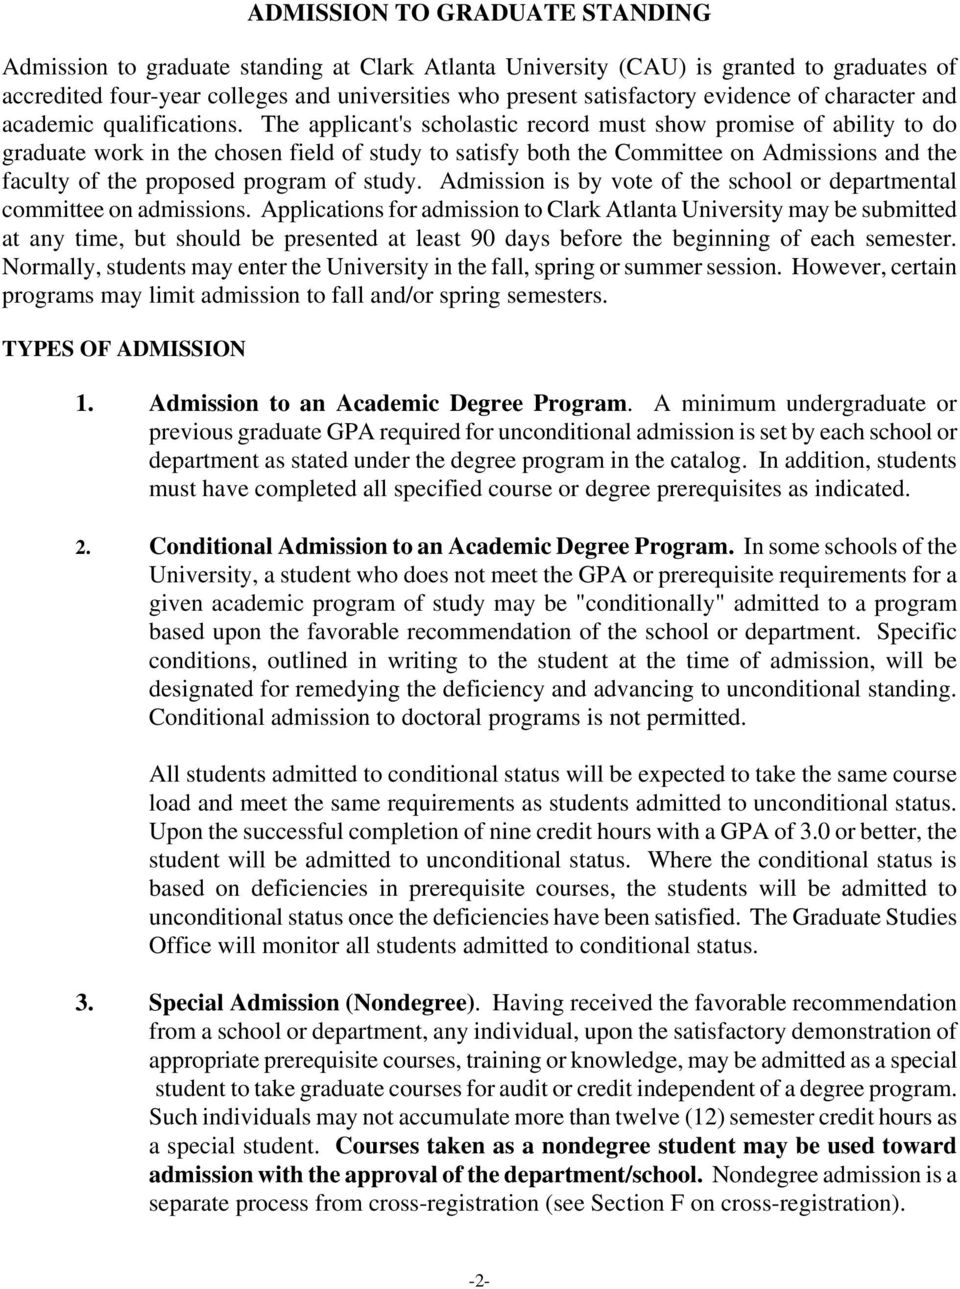 The applicant's scholastic record must show promise of ability to do graduate work in the chosen field of study to satisfy both the Committee on Admissions and the faculty of the proposed program of